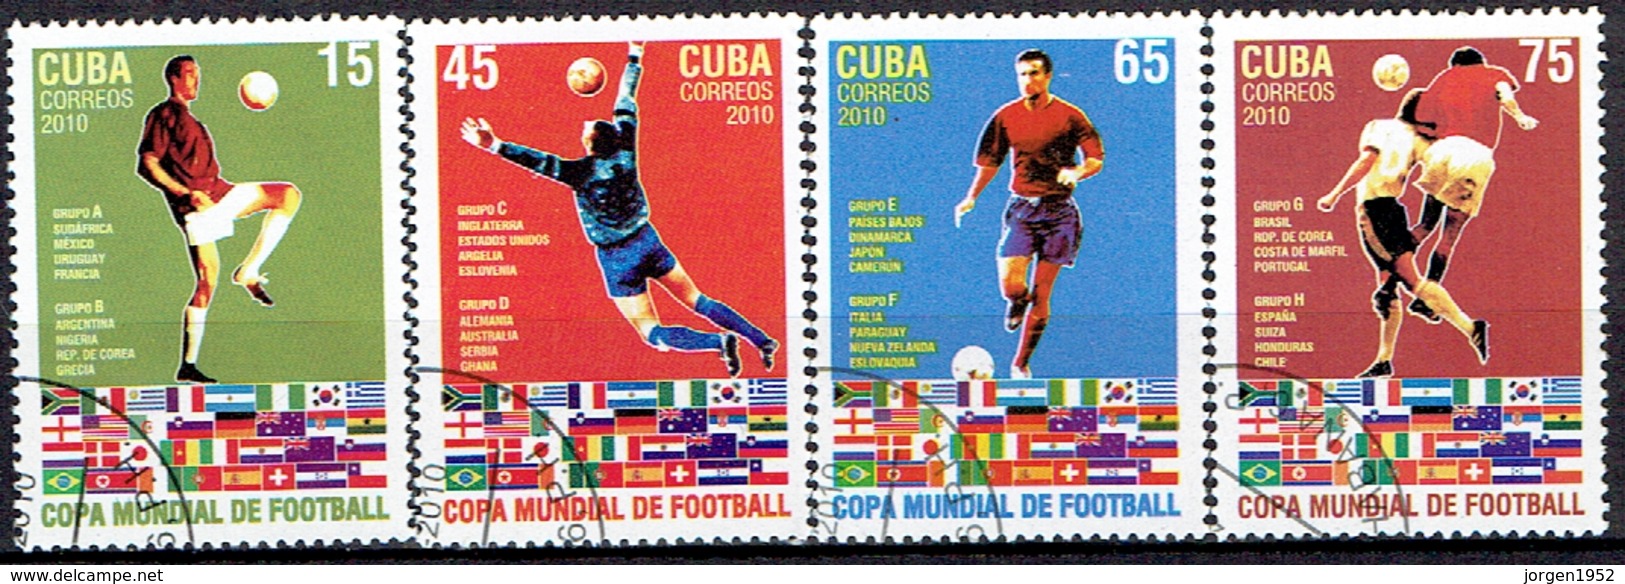 CUBA # FROM 2010 STAMPWORLD 5387-90 - Used Stamps